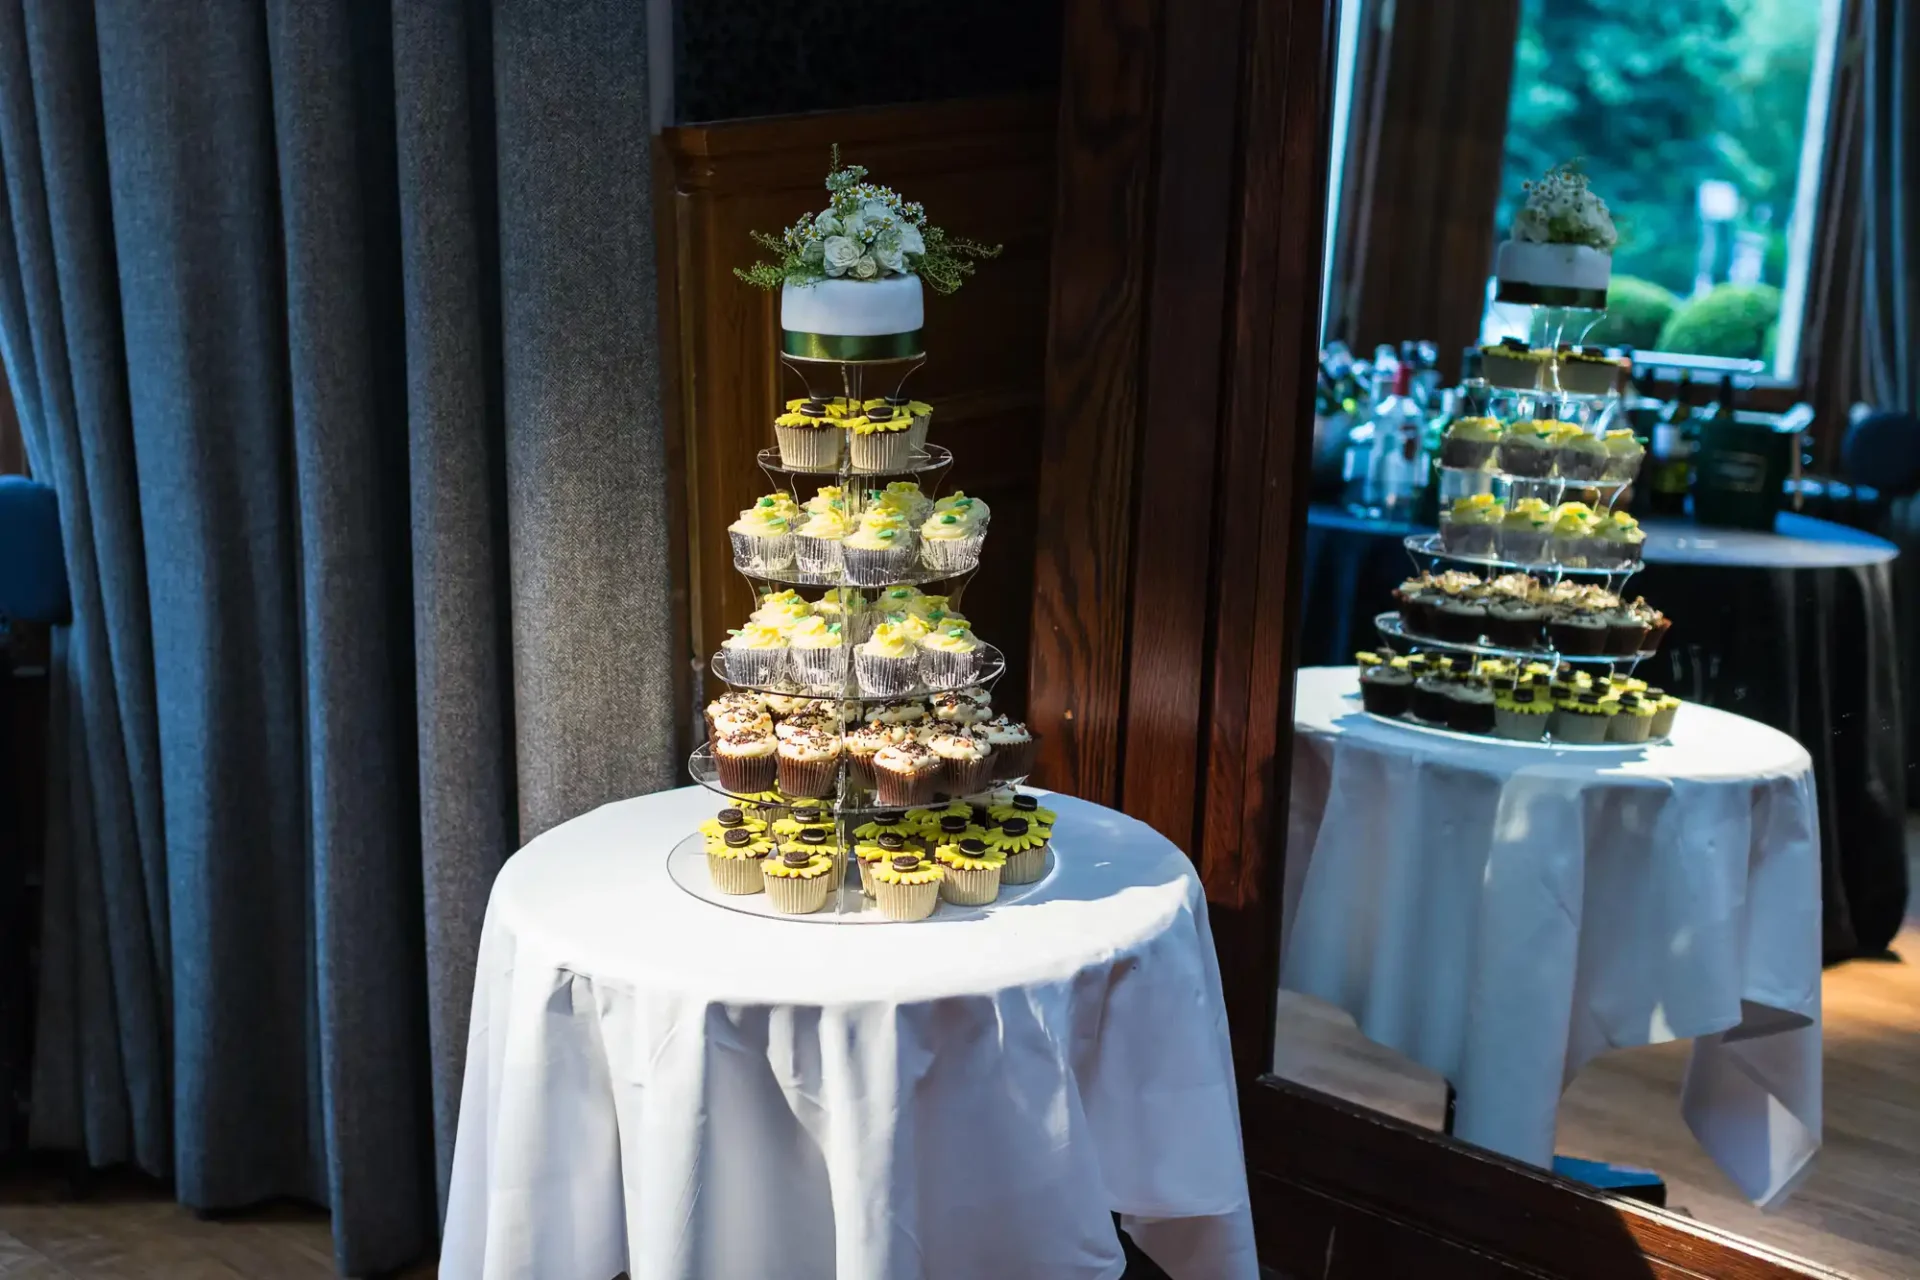 Tiers of assorted cupcakes on white cloth-covered tables, each topped with a floral arrangement, reflected in a large mirror in a dimly lit room.